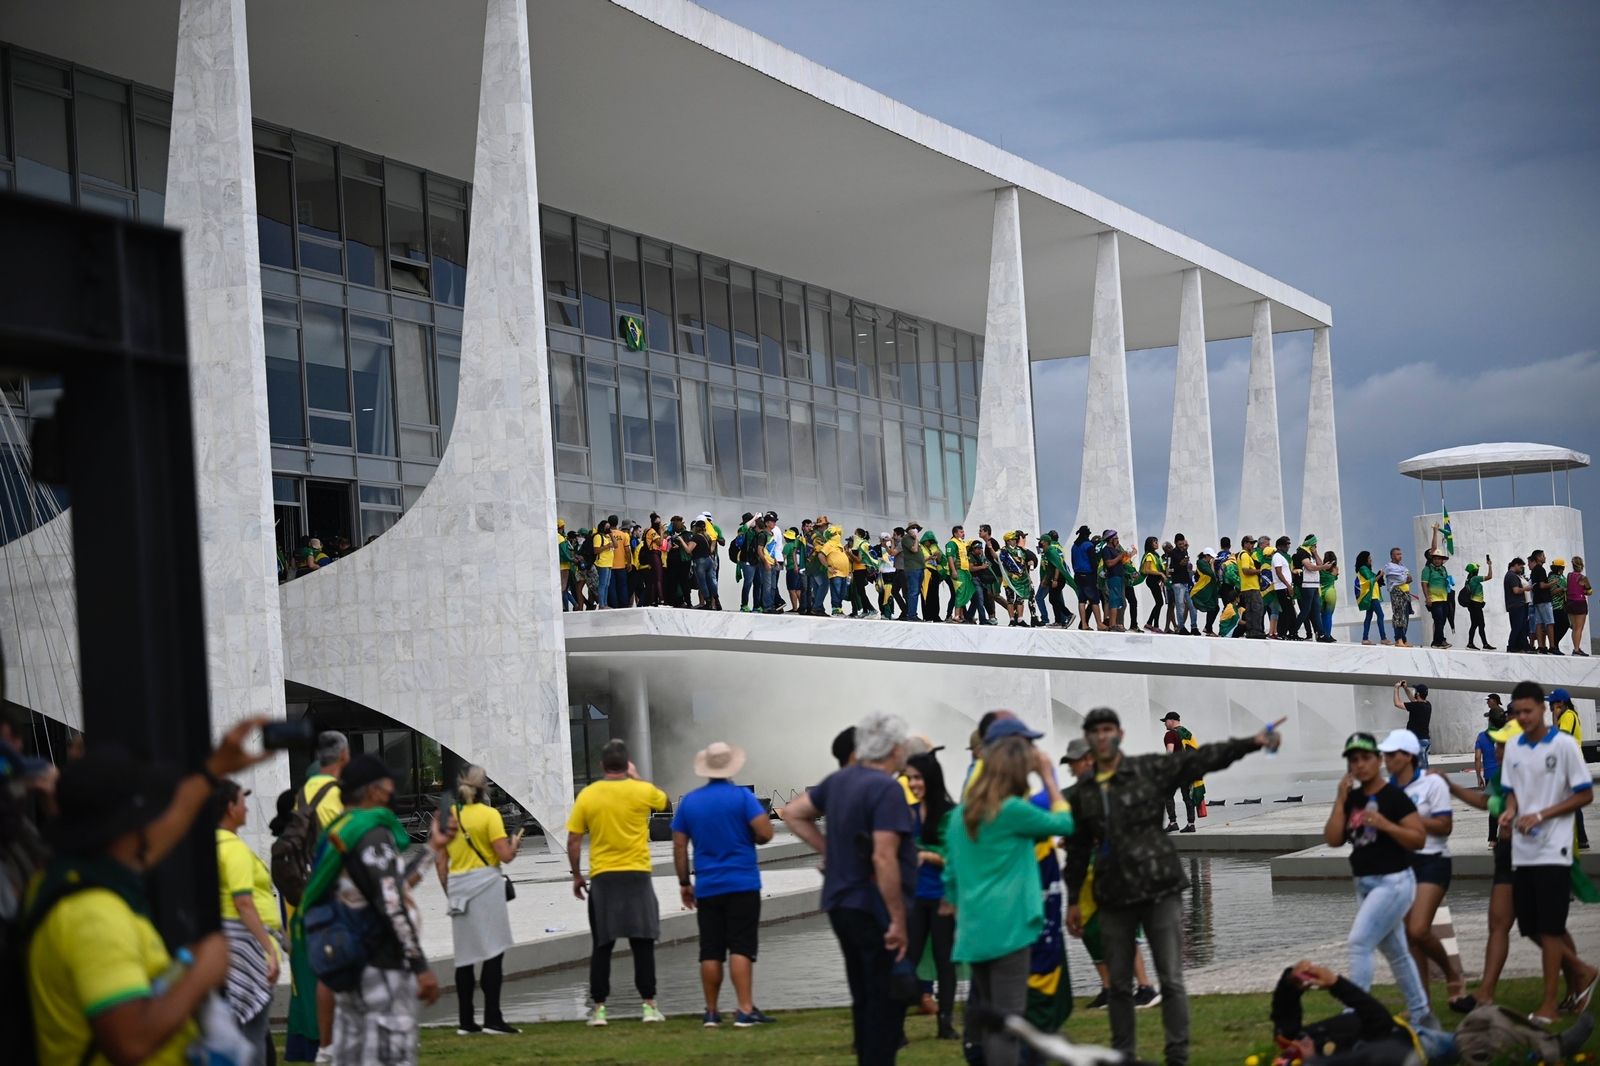  Bolsonaro supporters on a ramp leading up to the National Congress building in Brasilia on Jan. 8.